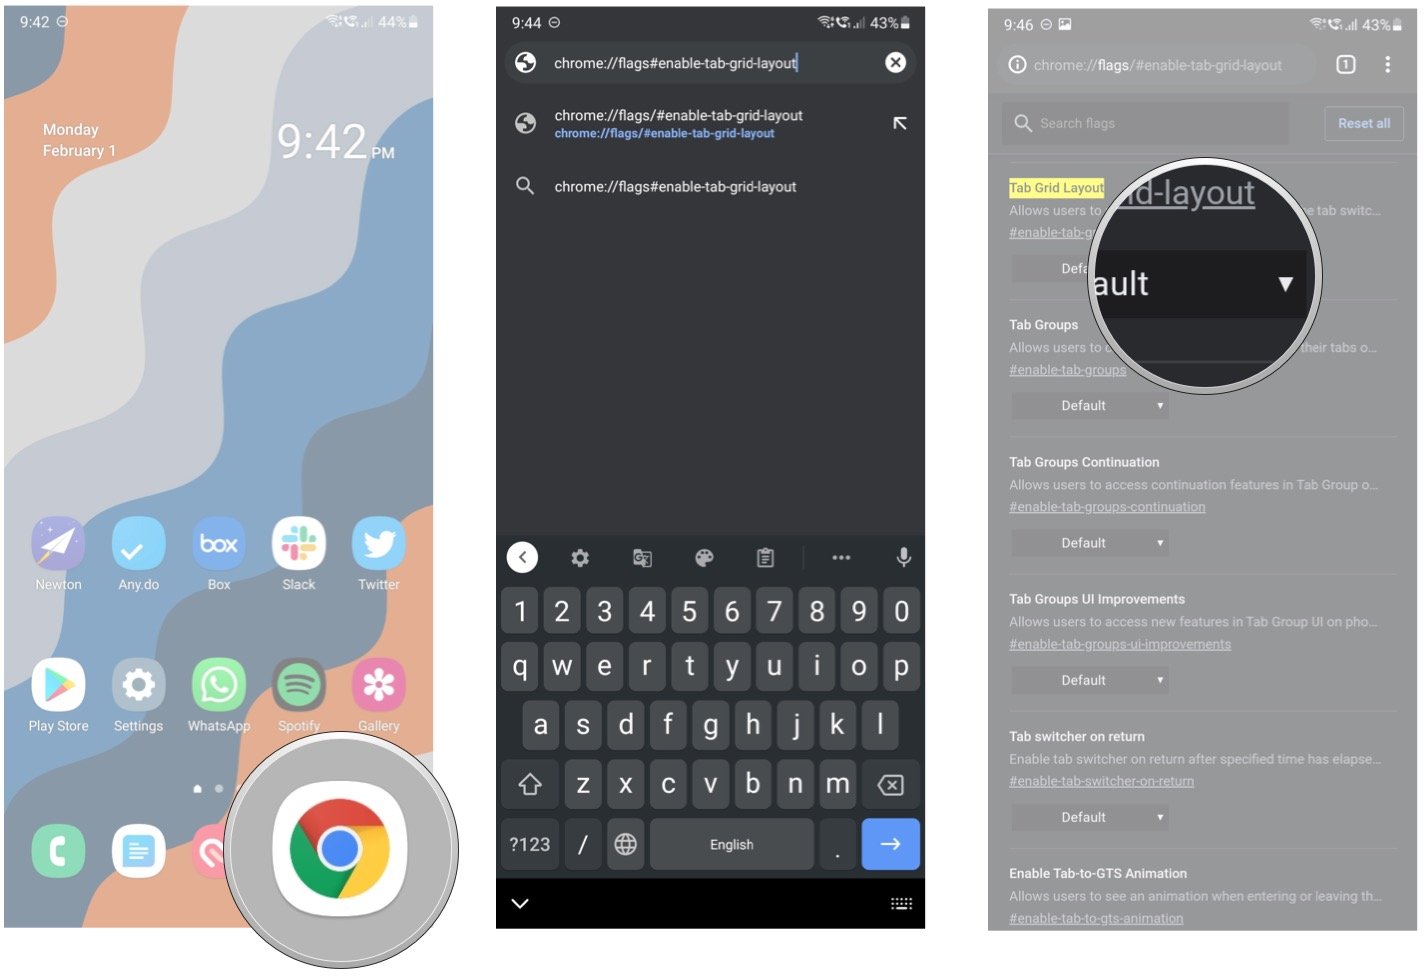 How to turn off grid view on Chrome for Android